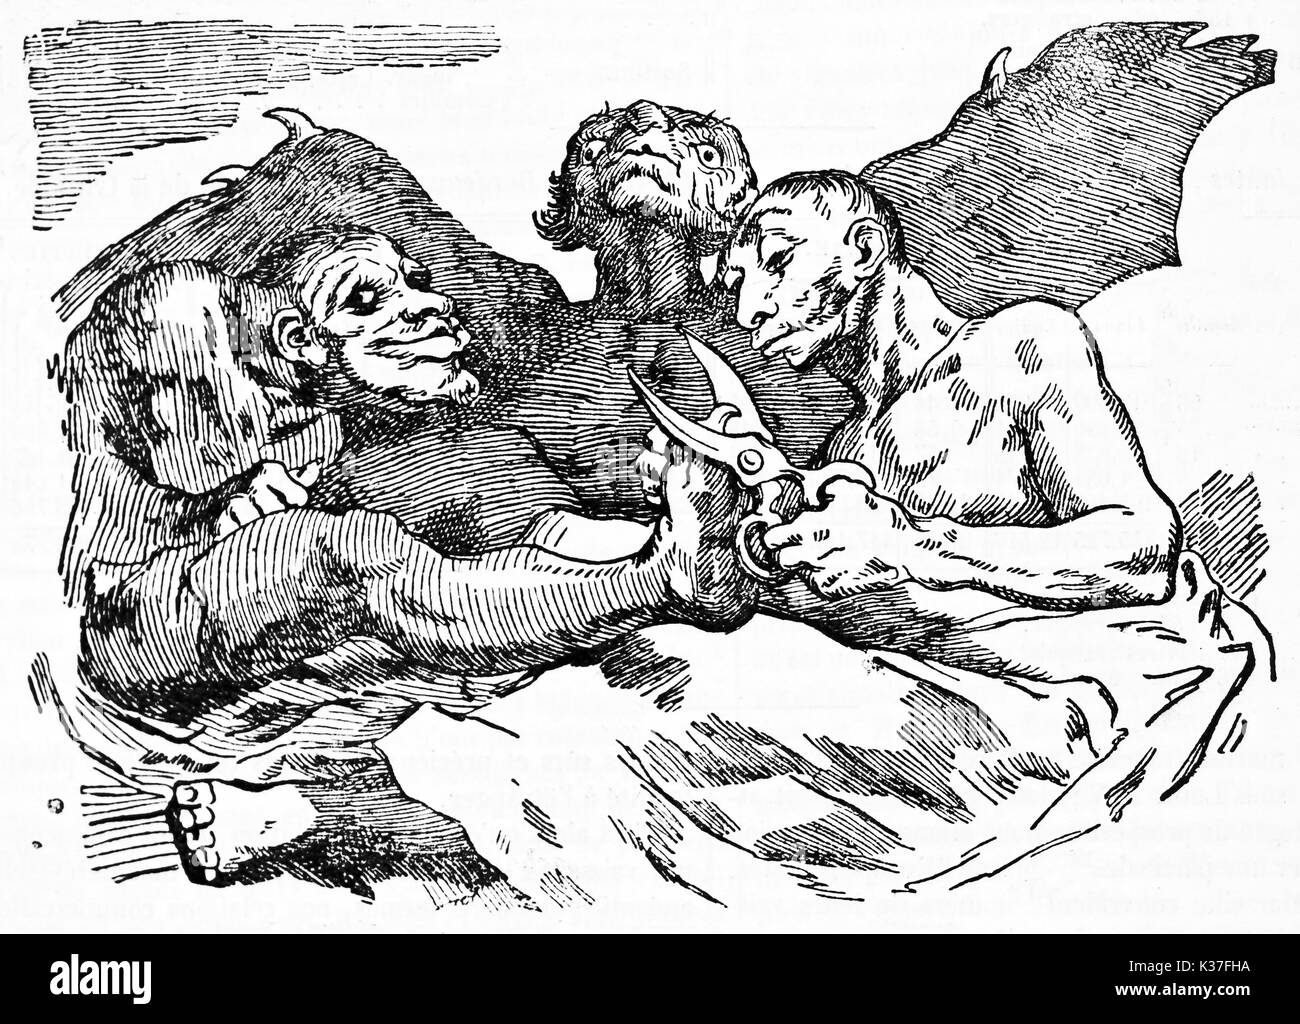 Devils cutting nails, ancient medieval grotesque context. Old caricature of Francisco Goya published on Magasin Pittoresque Paris 1834 Stock Photo